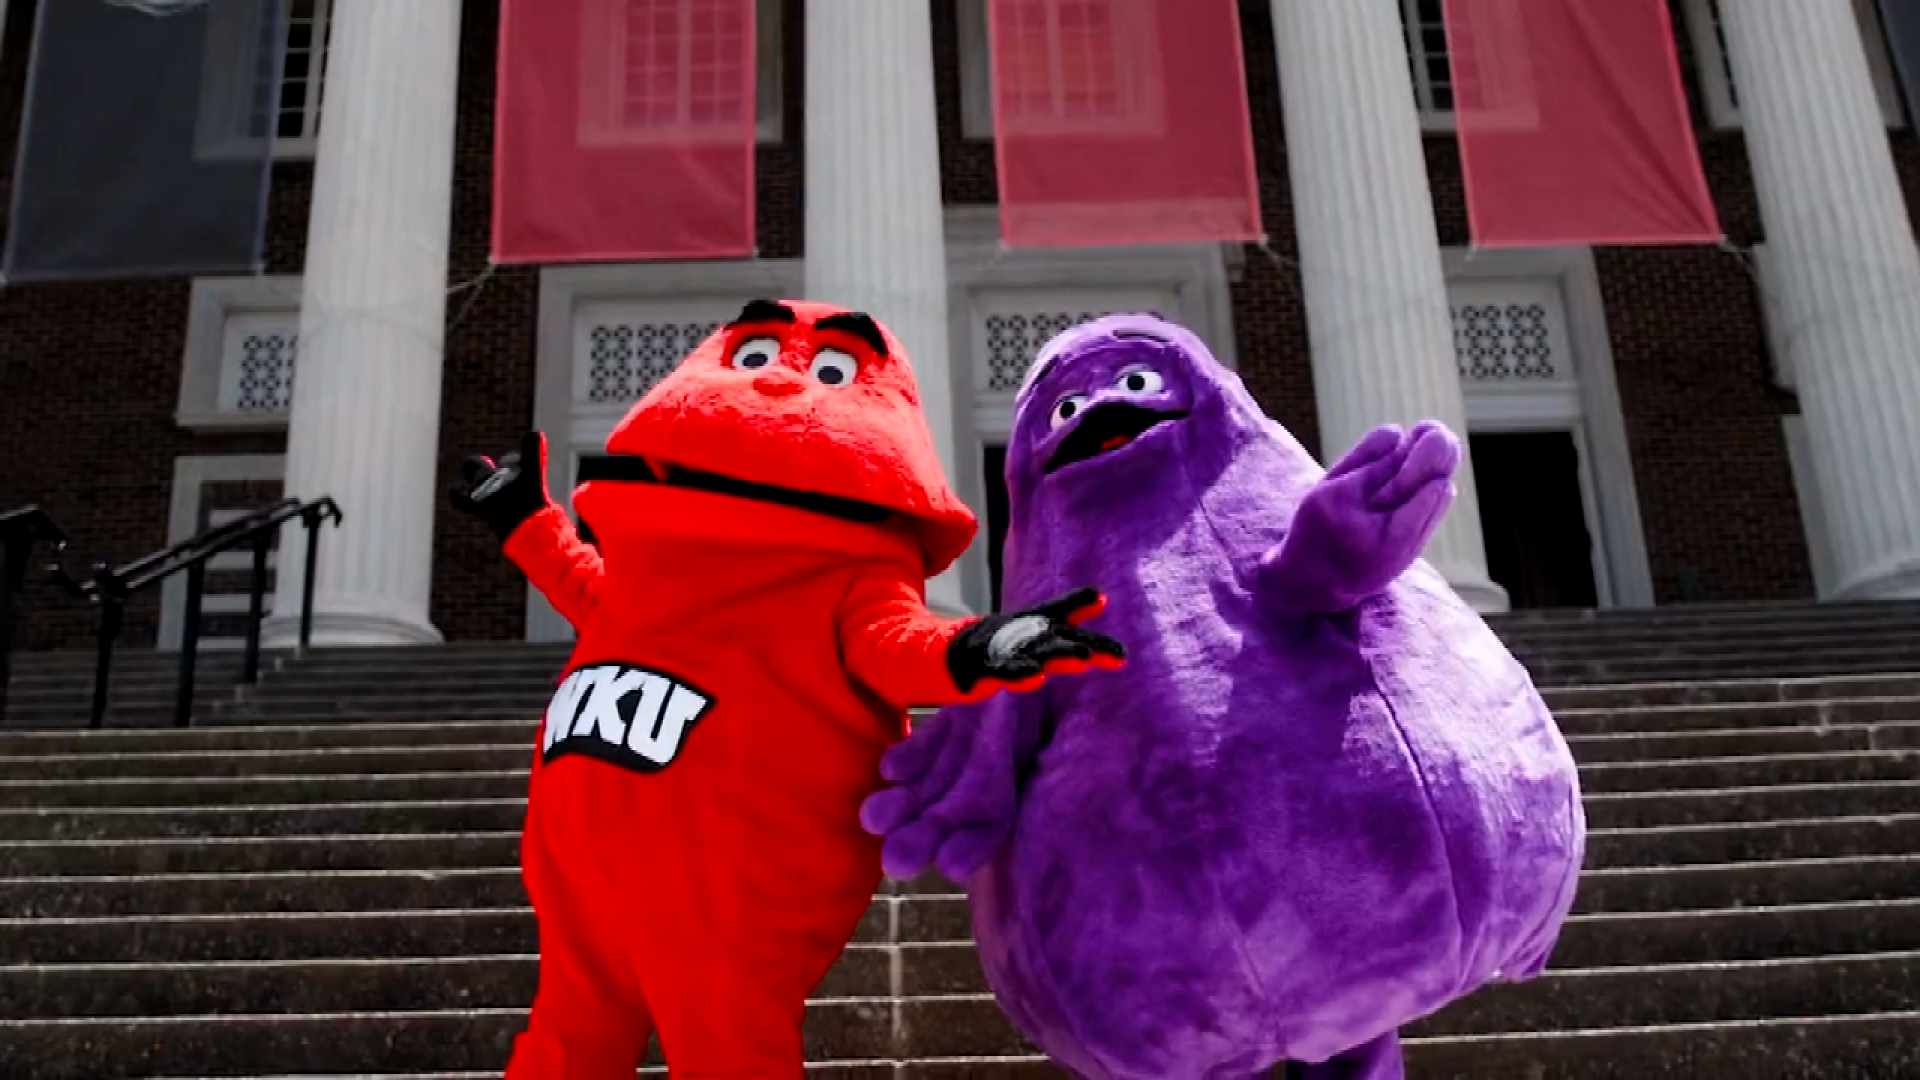 WKU's Big Red becomes friends with McDonald's Grimace